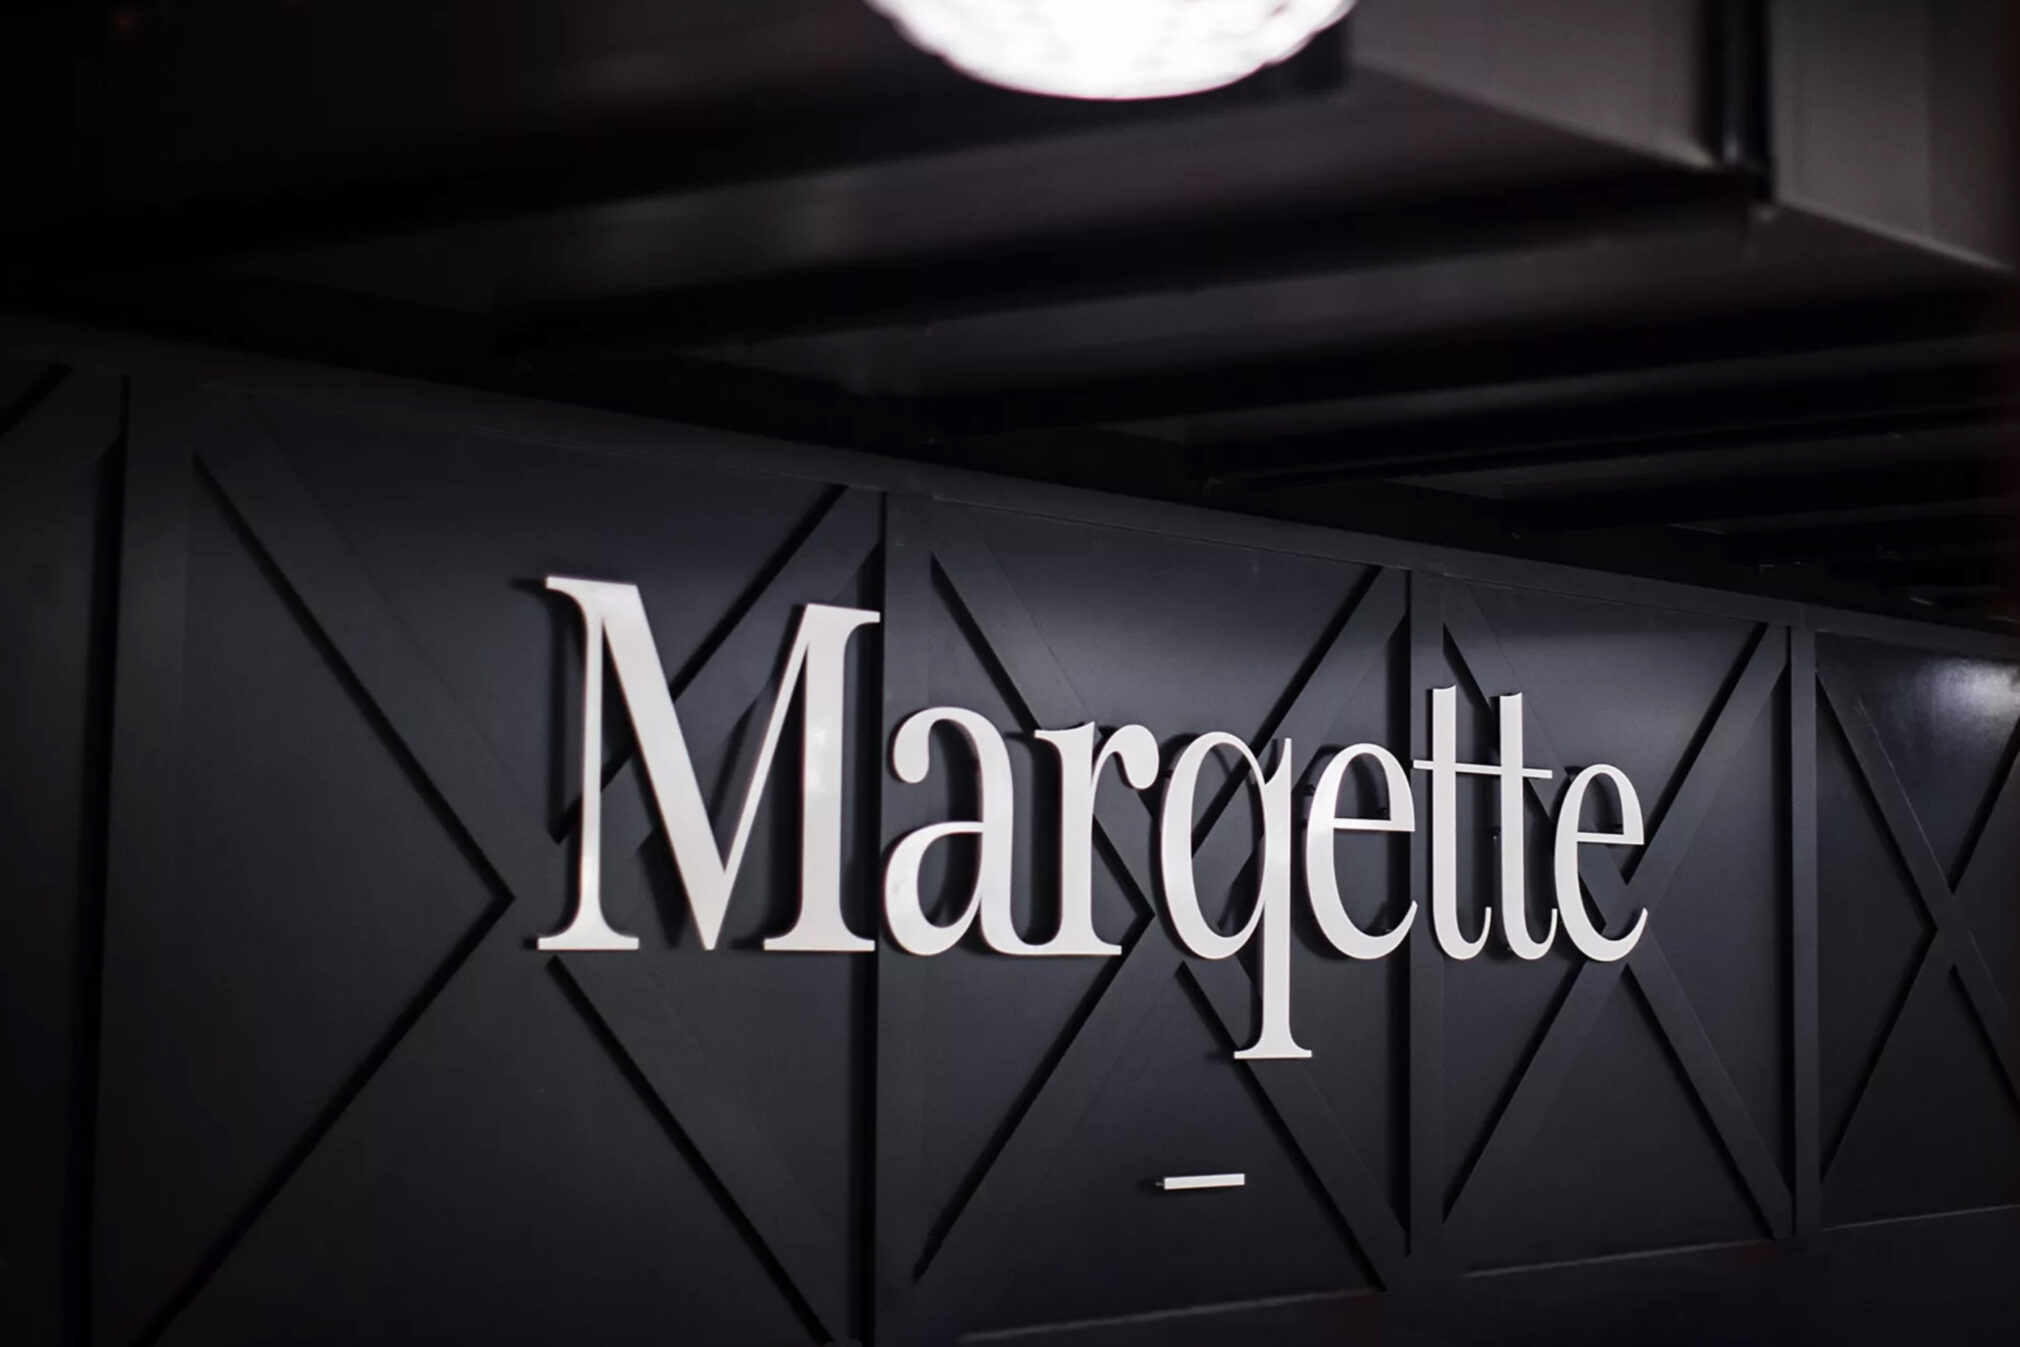 Marqette white wall sign